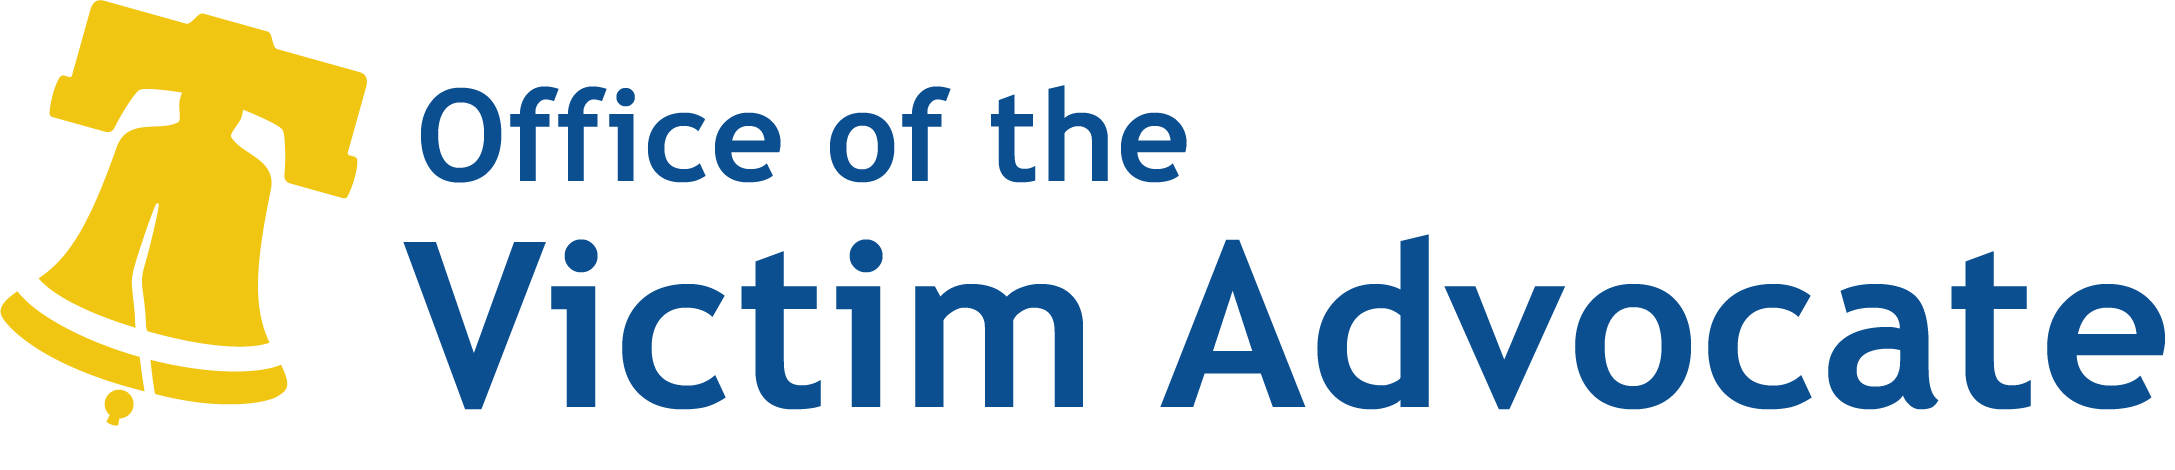 Office of the Victim Advocate logo